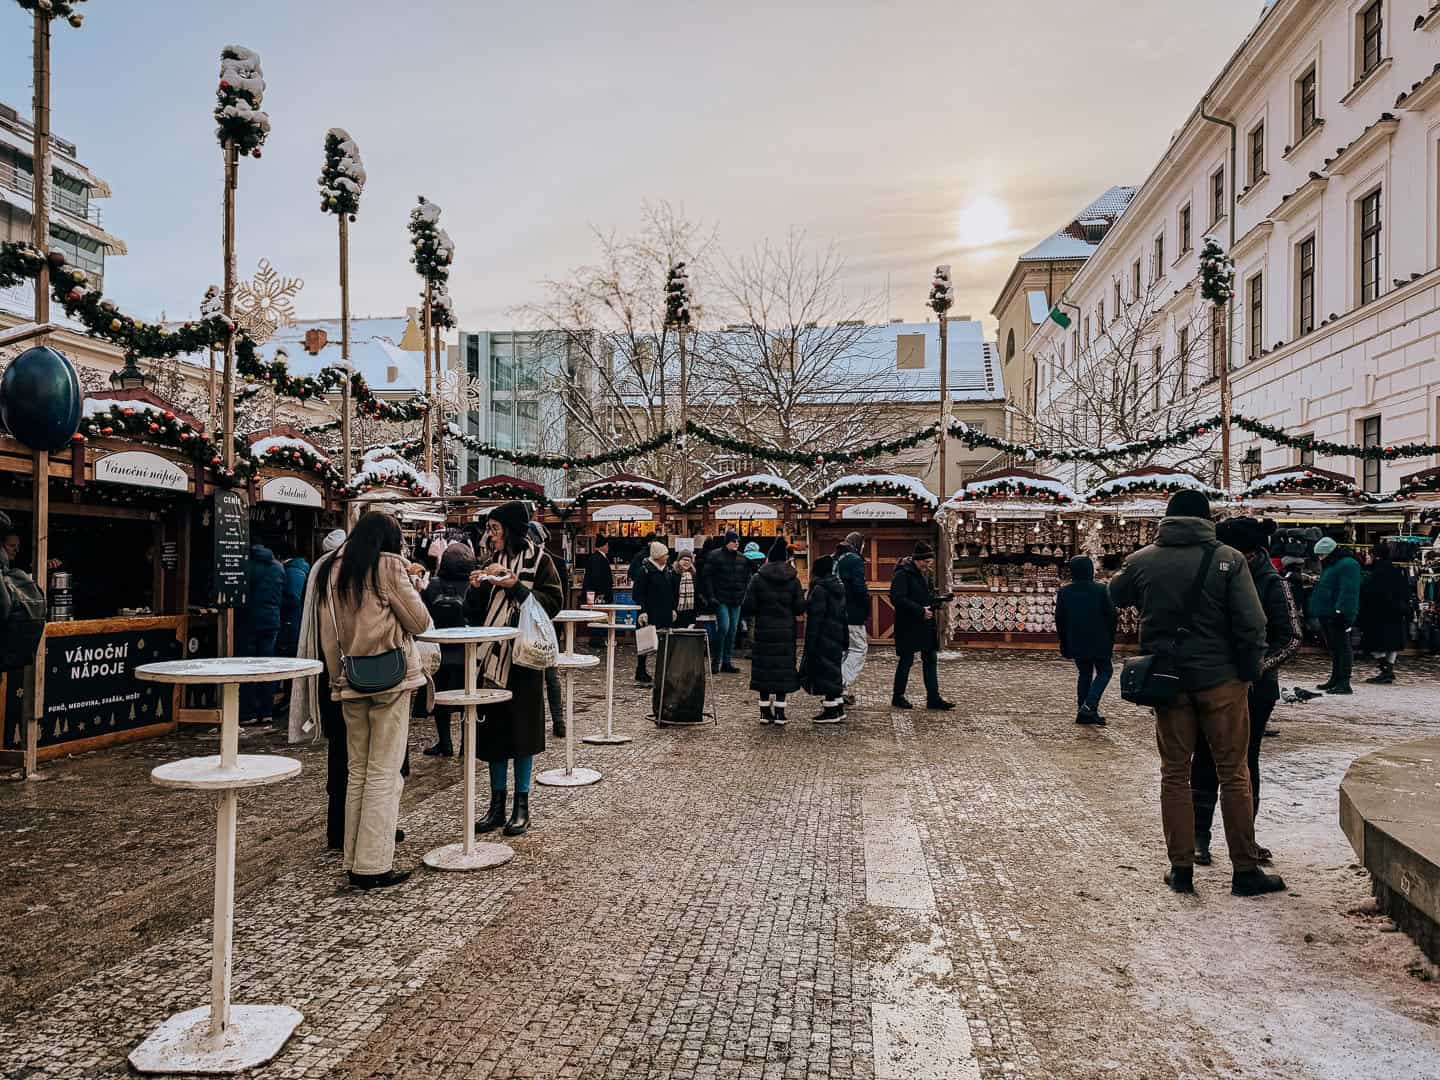 A bustling Christmas market during daylight with shoppers walking among festively decorated wooden stalls under a soft winter sun.